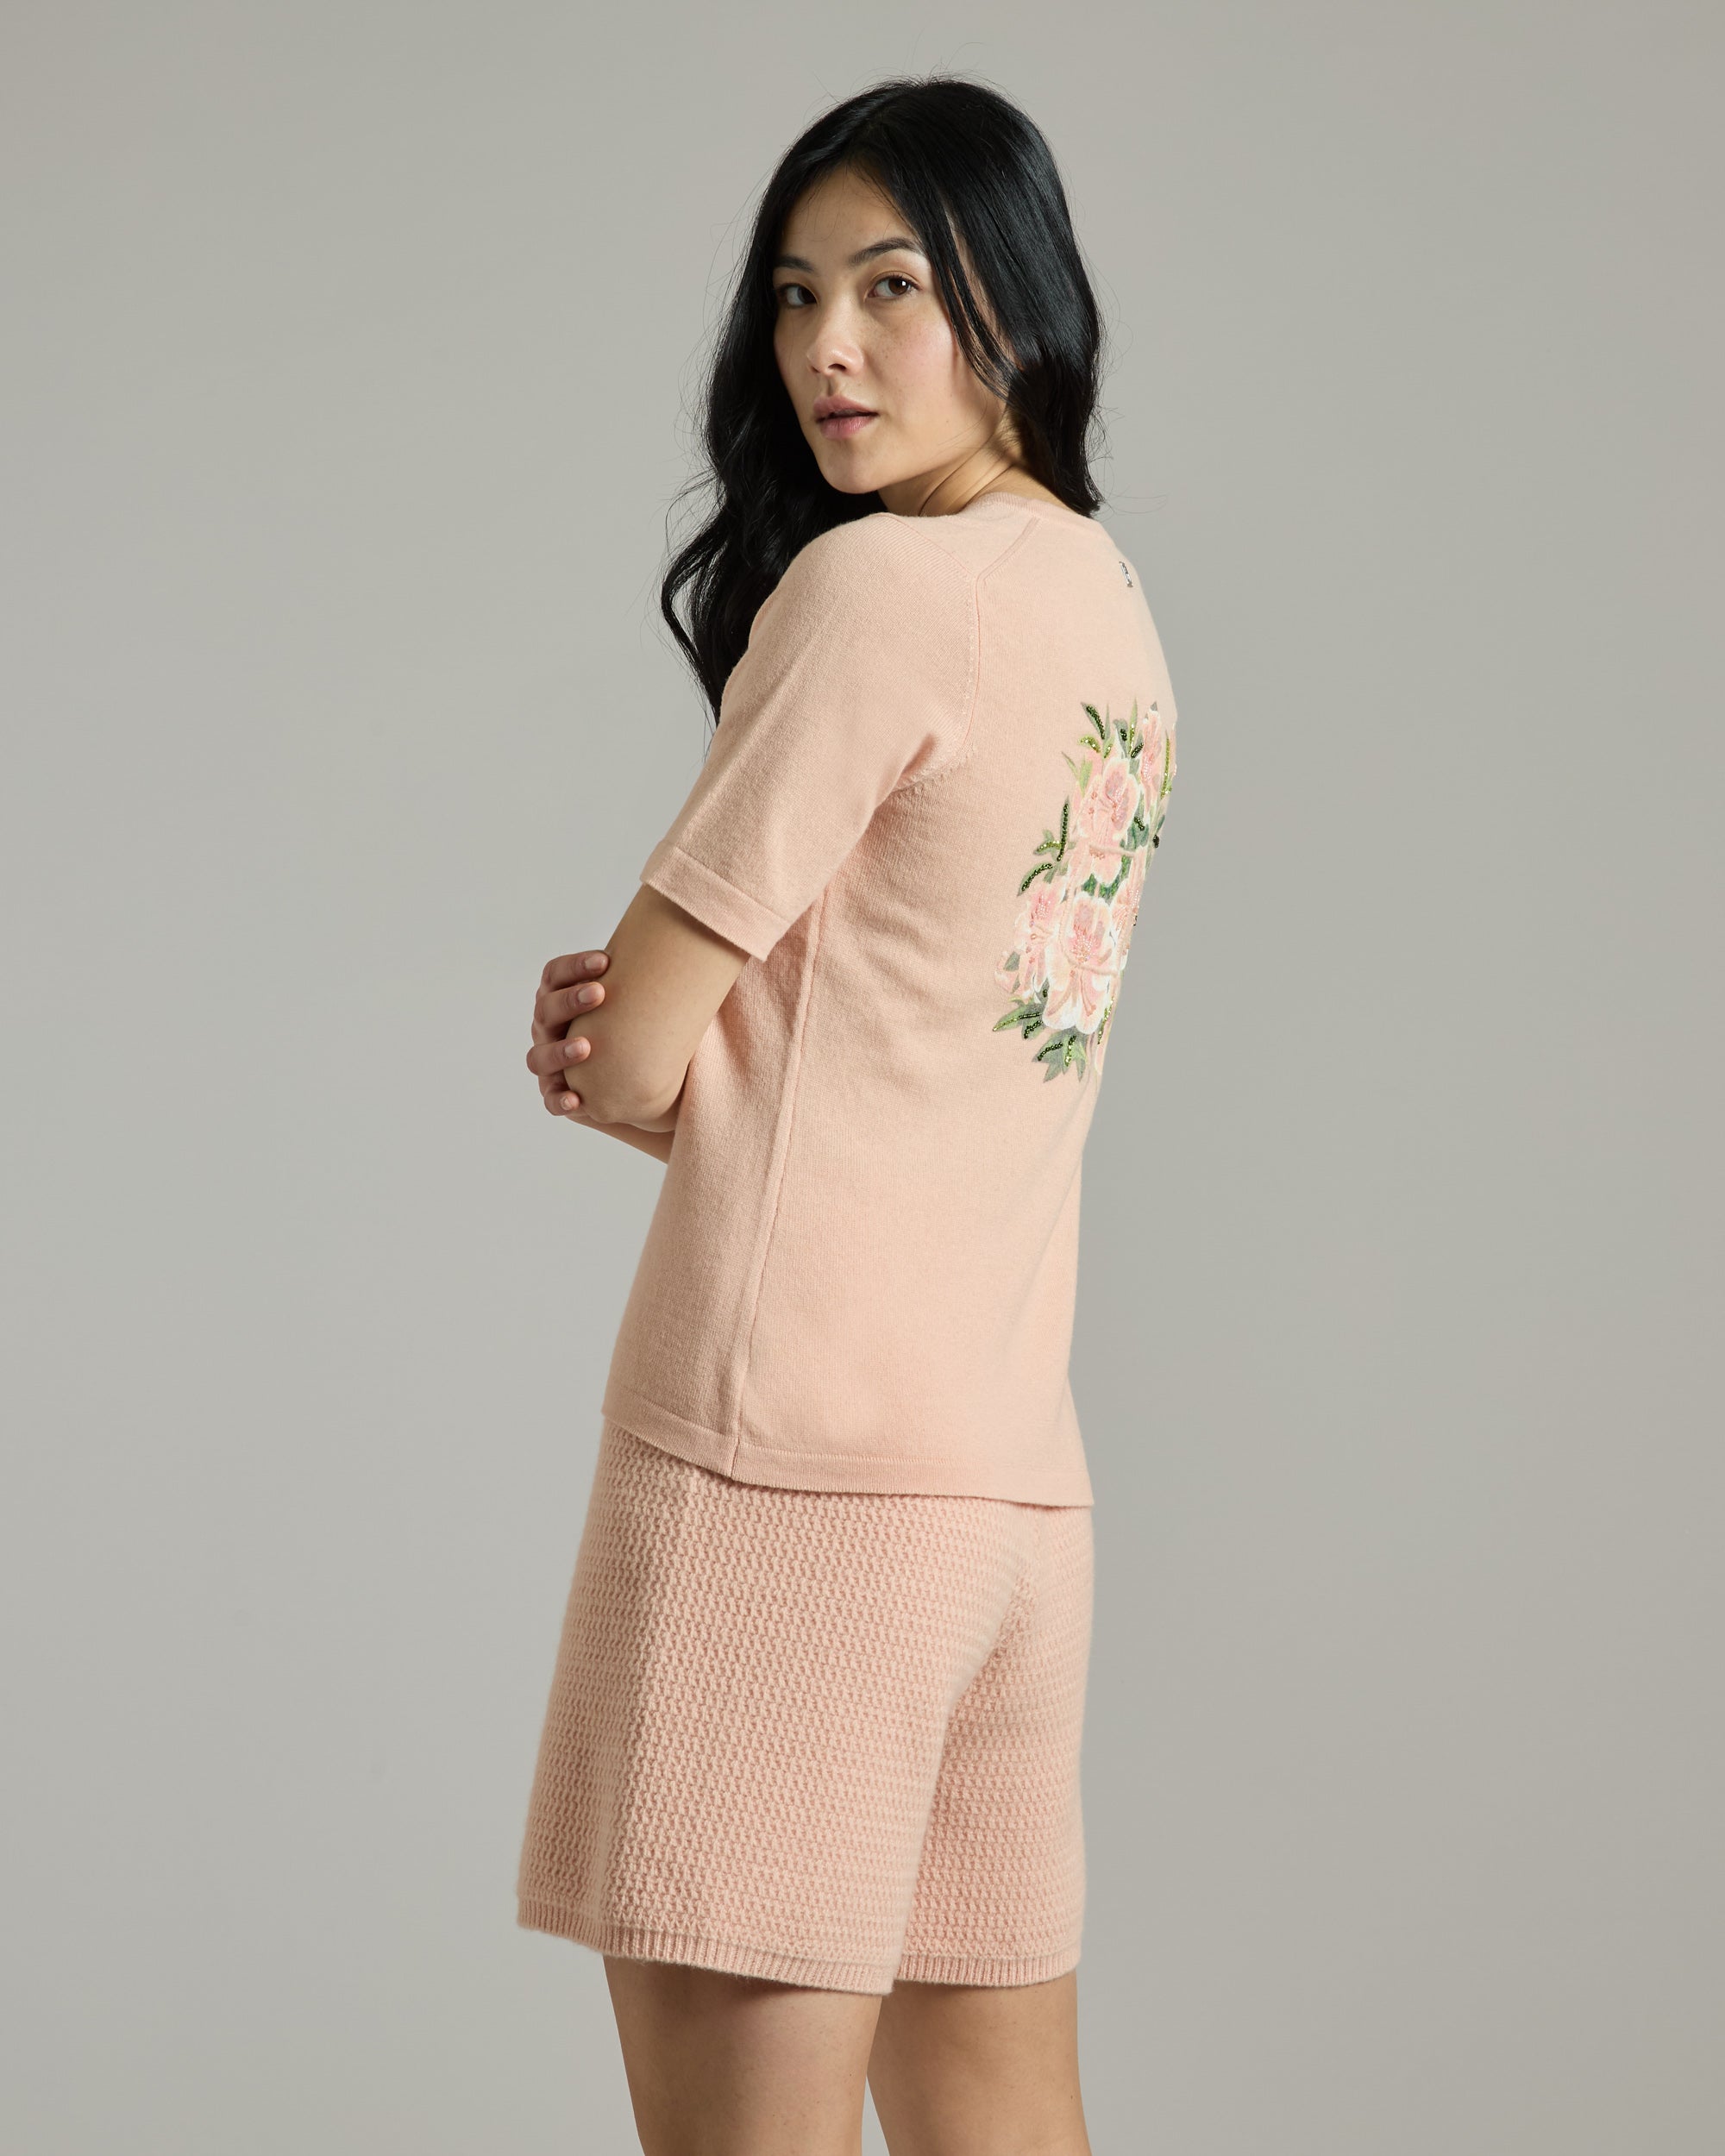 Kid Cashmere v-neck with floral embroidery